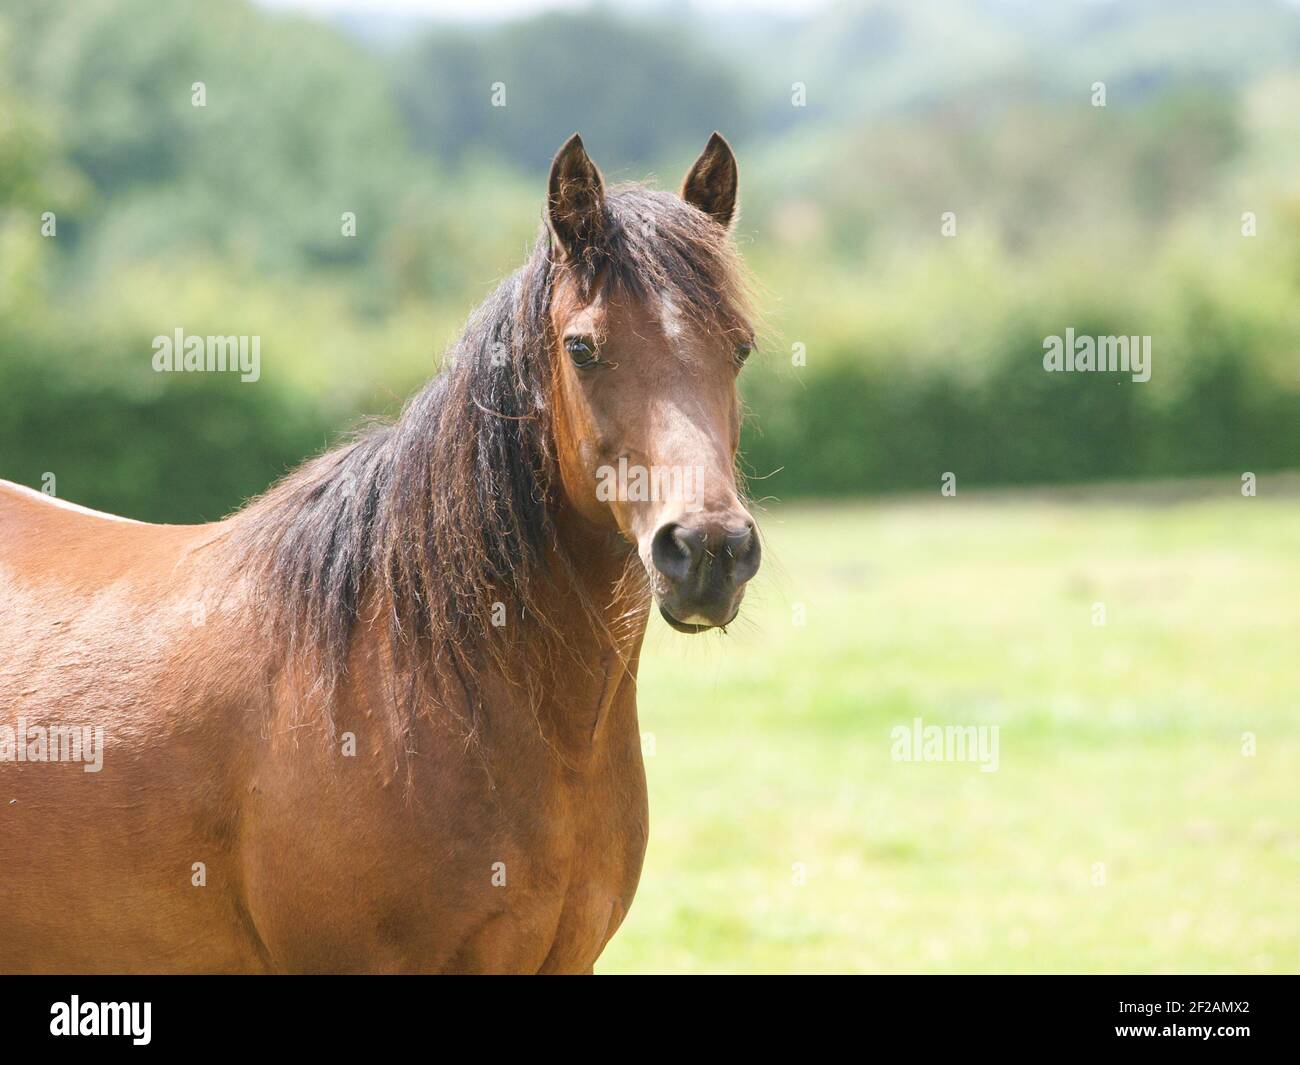 A pretty bay horse with a long mane stands alone in a paddock. Stock Photo